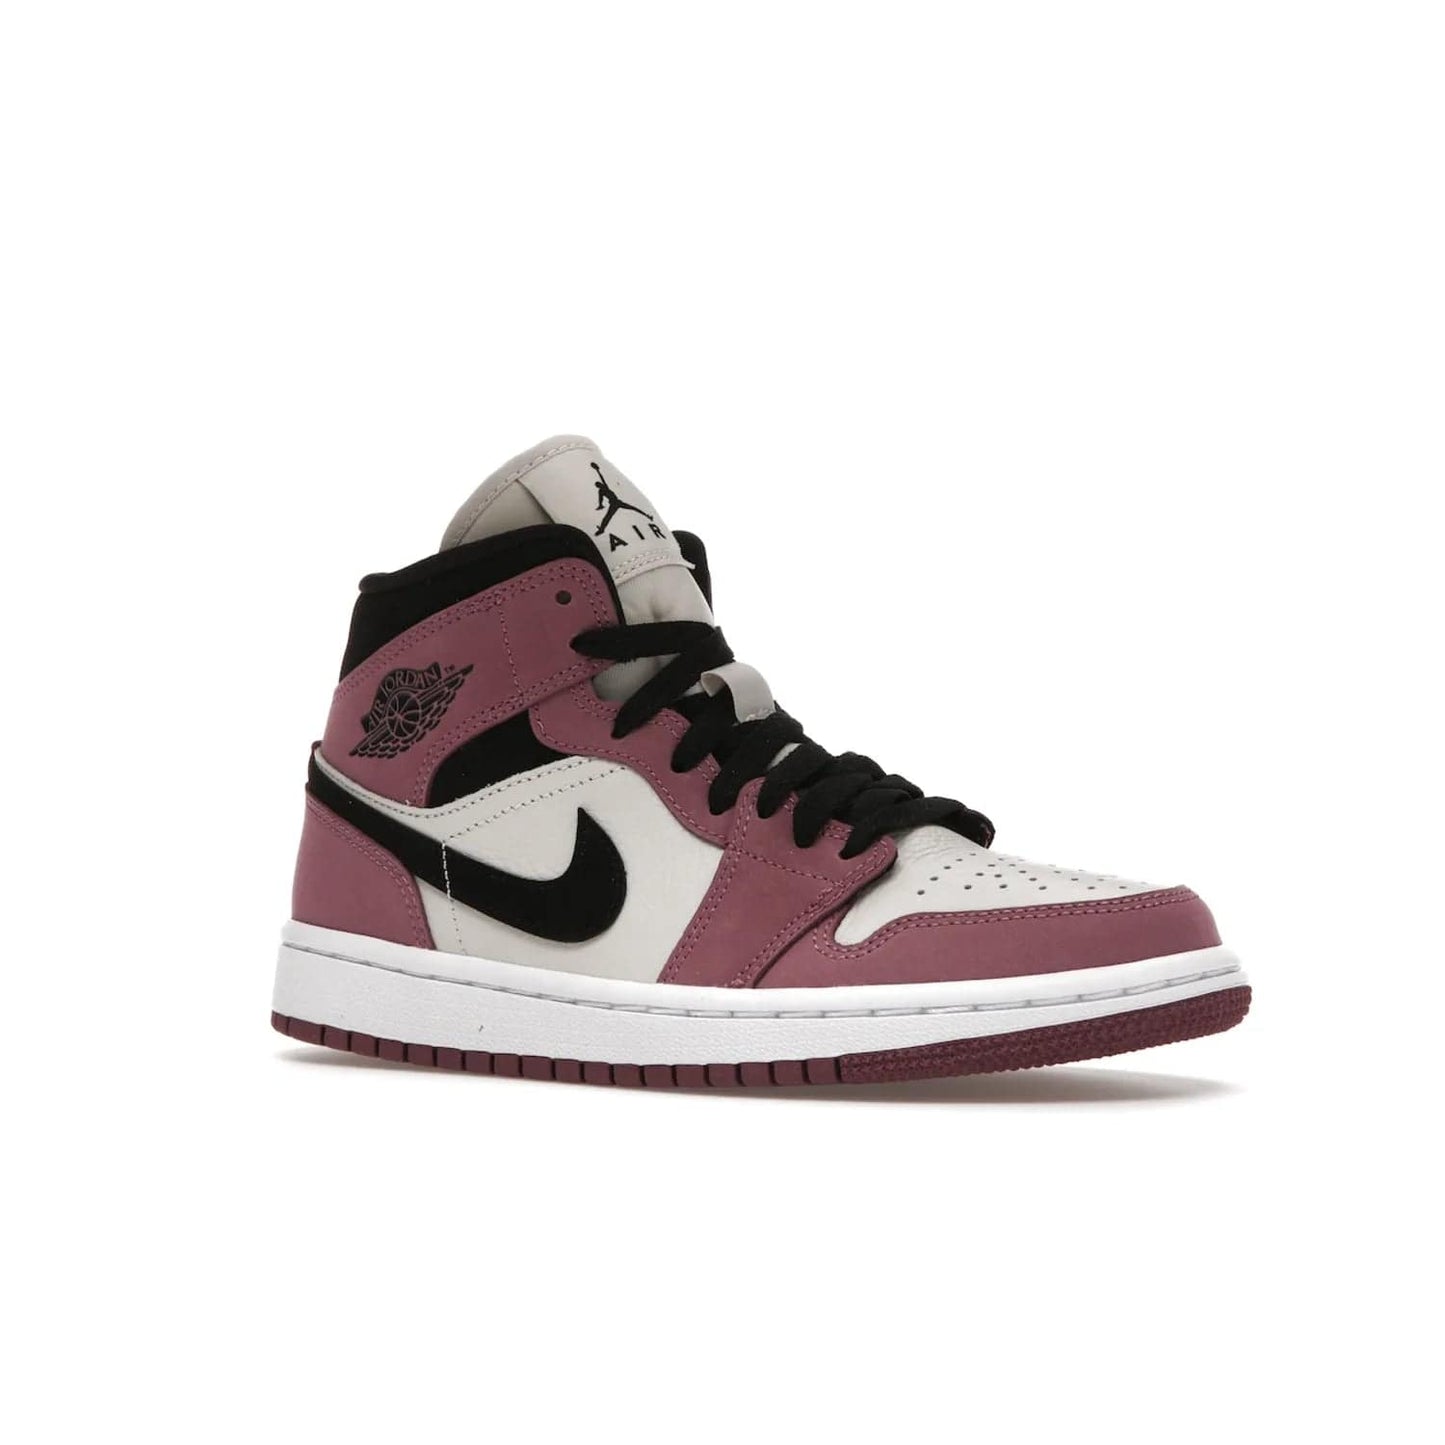 Jordan 1 Mid SE Light Mulberry (Women's) - Image 4 - Only at www.BallersClubKickz.com - Classic style meets performance with the Air Jordan 1 Mid Light Mulberry (Women's). Sleek leather overlays and light bone detailing bring out the best of this classic sneaker, perfect for the active woman on-the-go. Available March 2022.